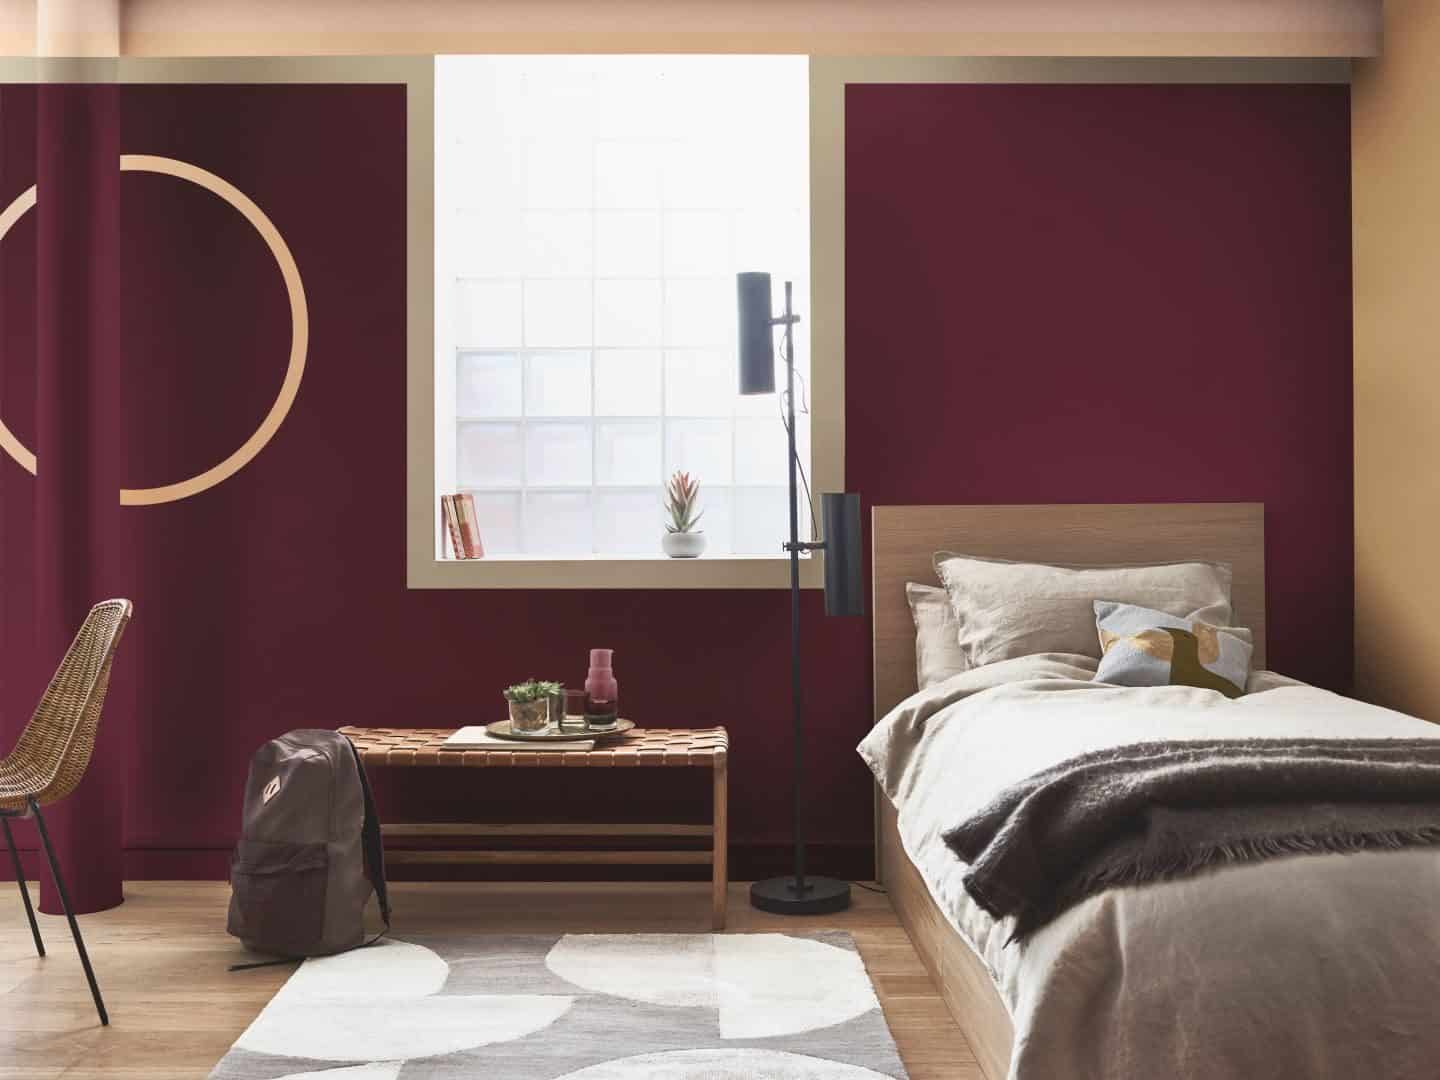 Dulux Colour of the Year 2019 - Spiced Honey (8)